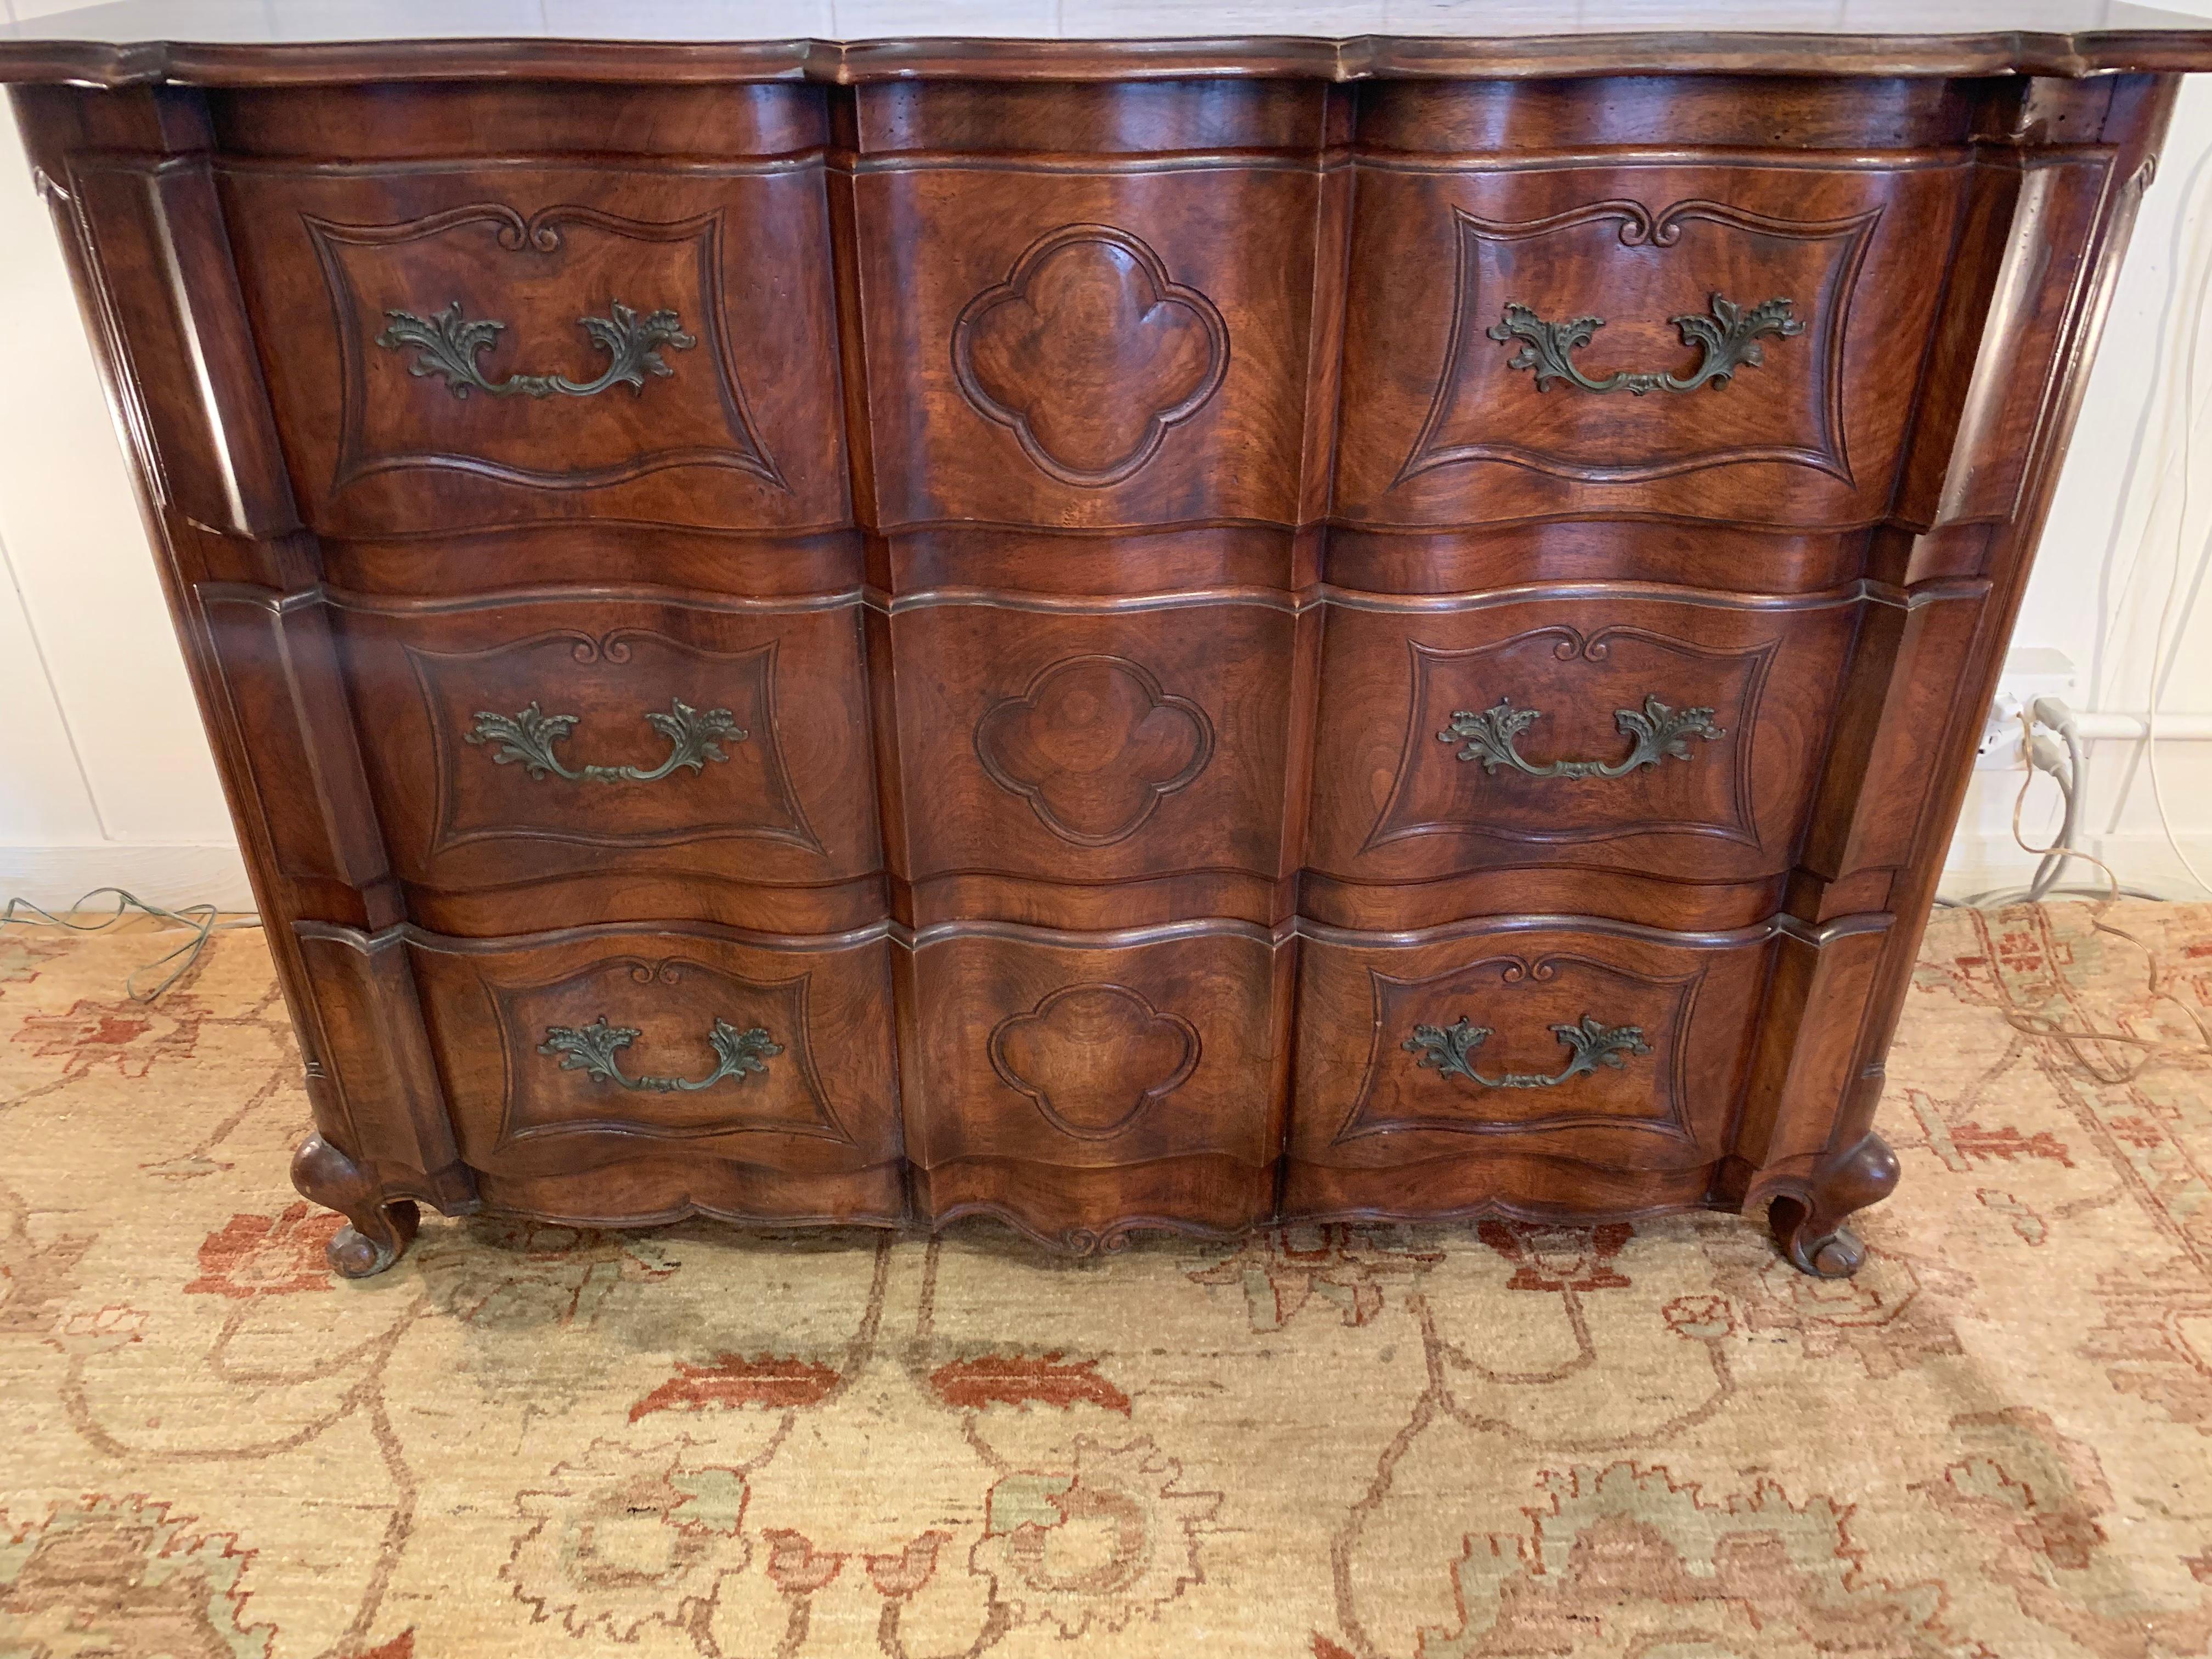 Handsome and solid mahogany dresser having serpentine front with conforming top and apron, resting on scroll feet. Its curvilinear form is enhanced by the inset panels on its sides and hand carved drawer fronts that include gorgeous beaded panels